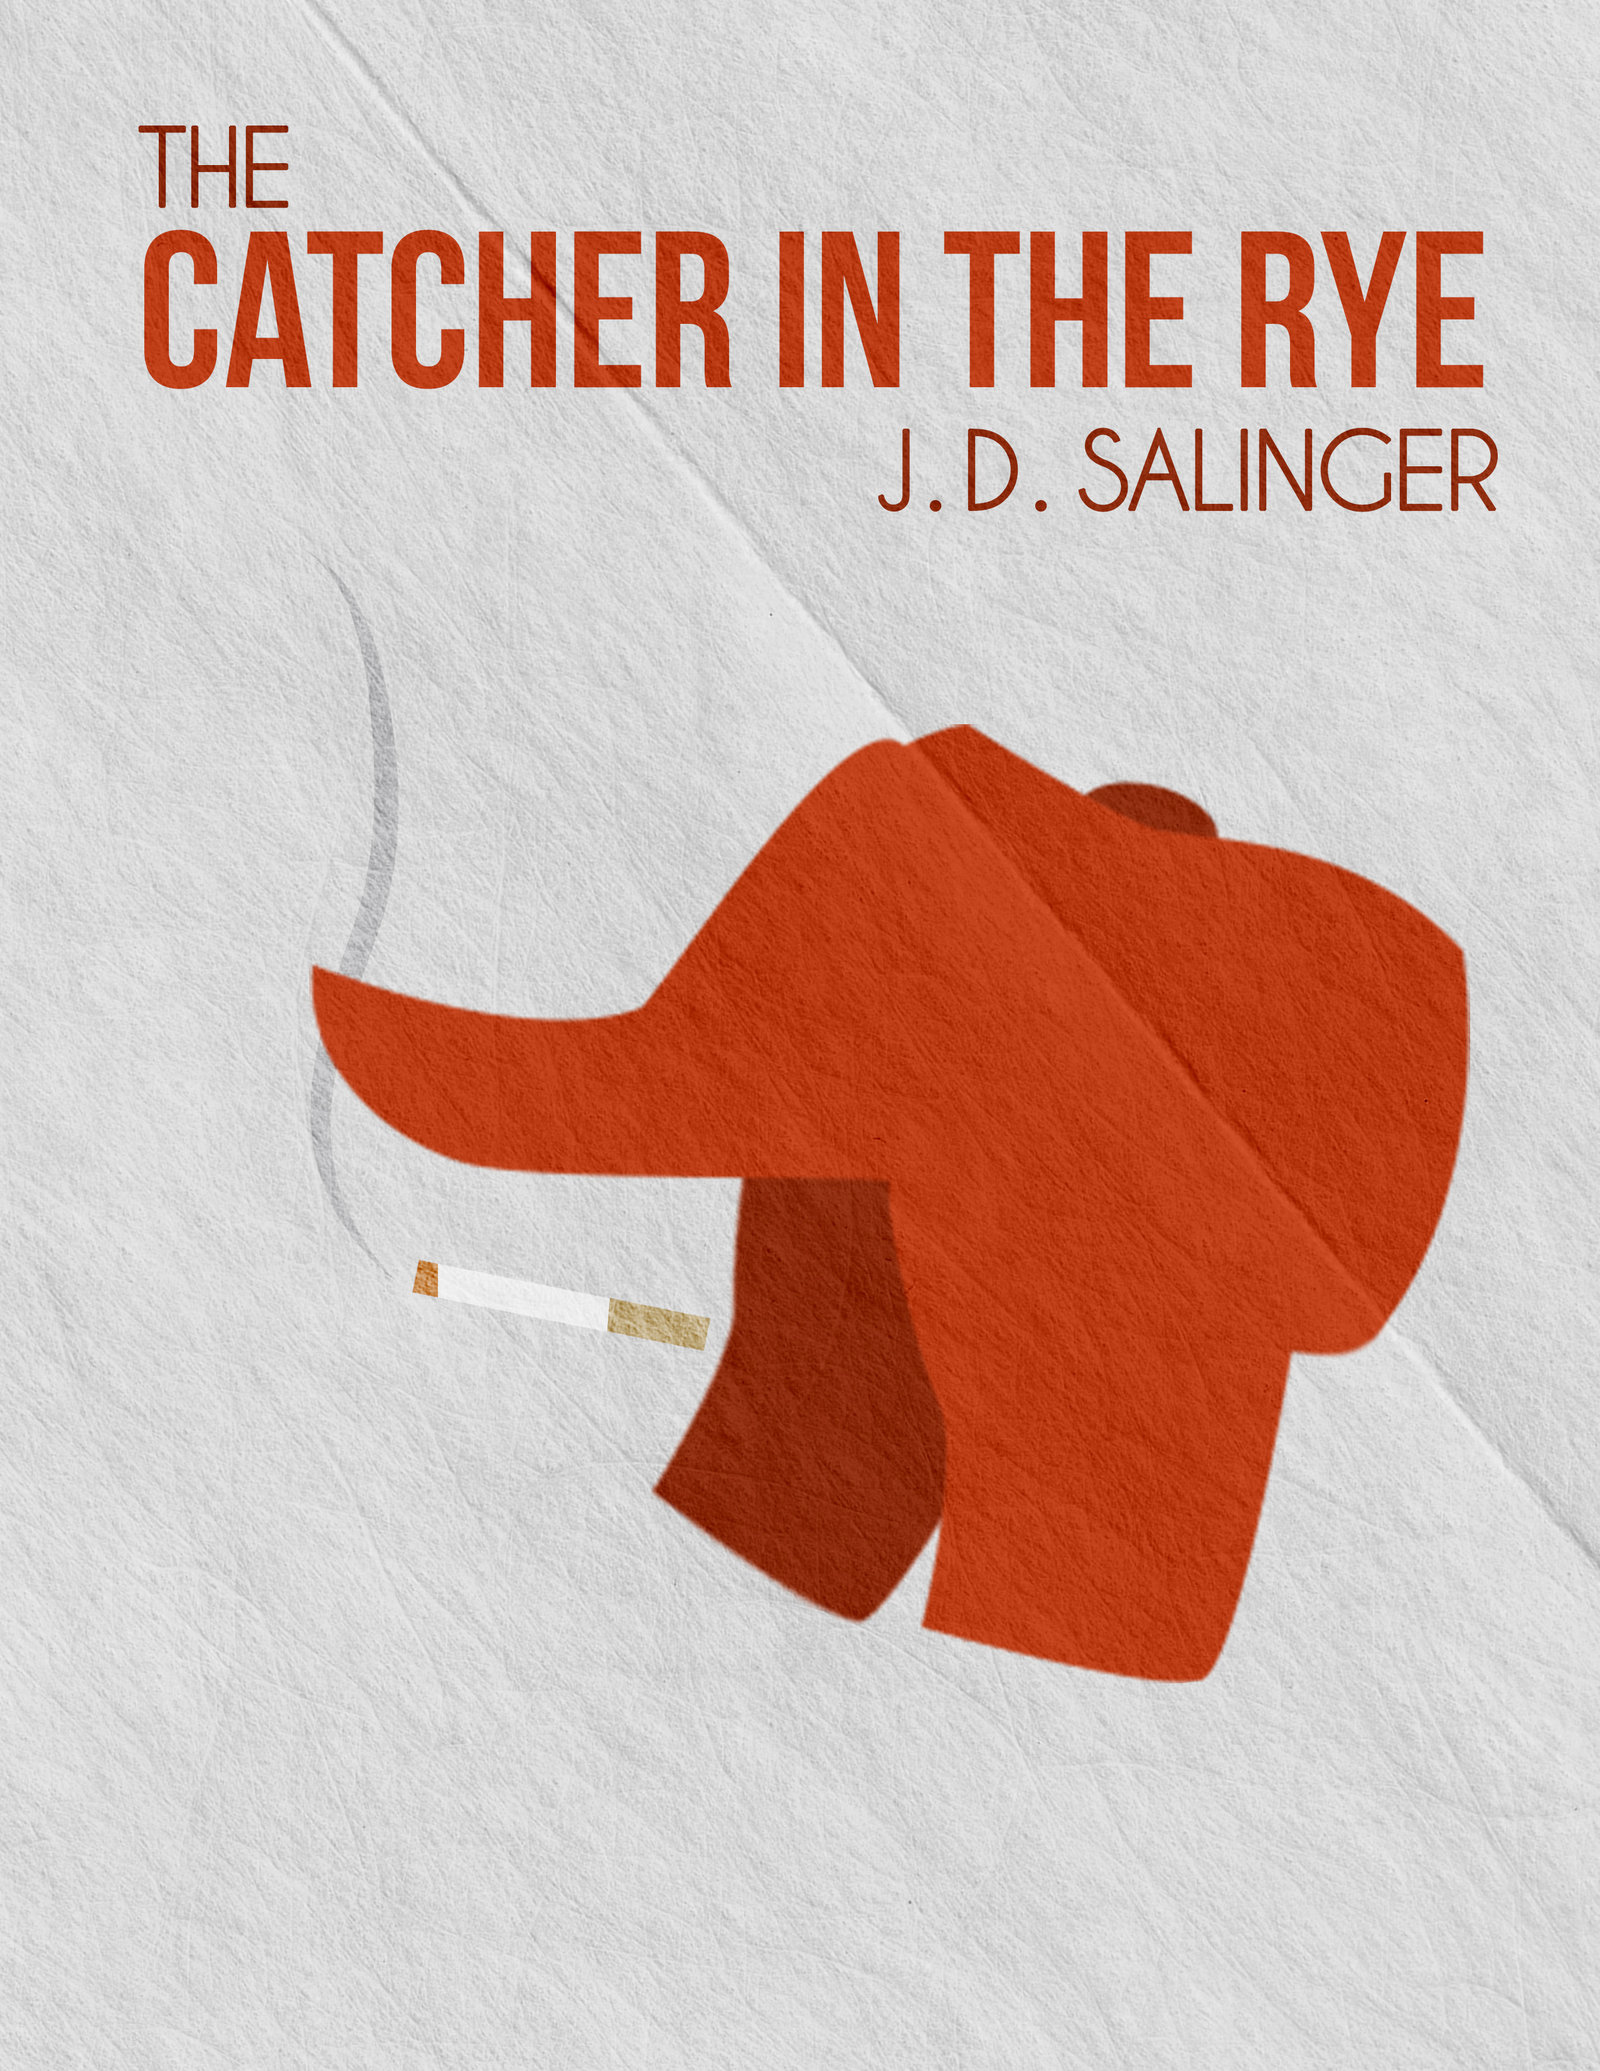 minimalist_book_poster__catcher_in_the_rye_by_seanelynn-d7sfn2s